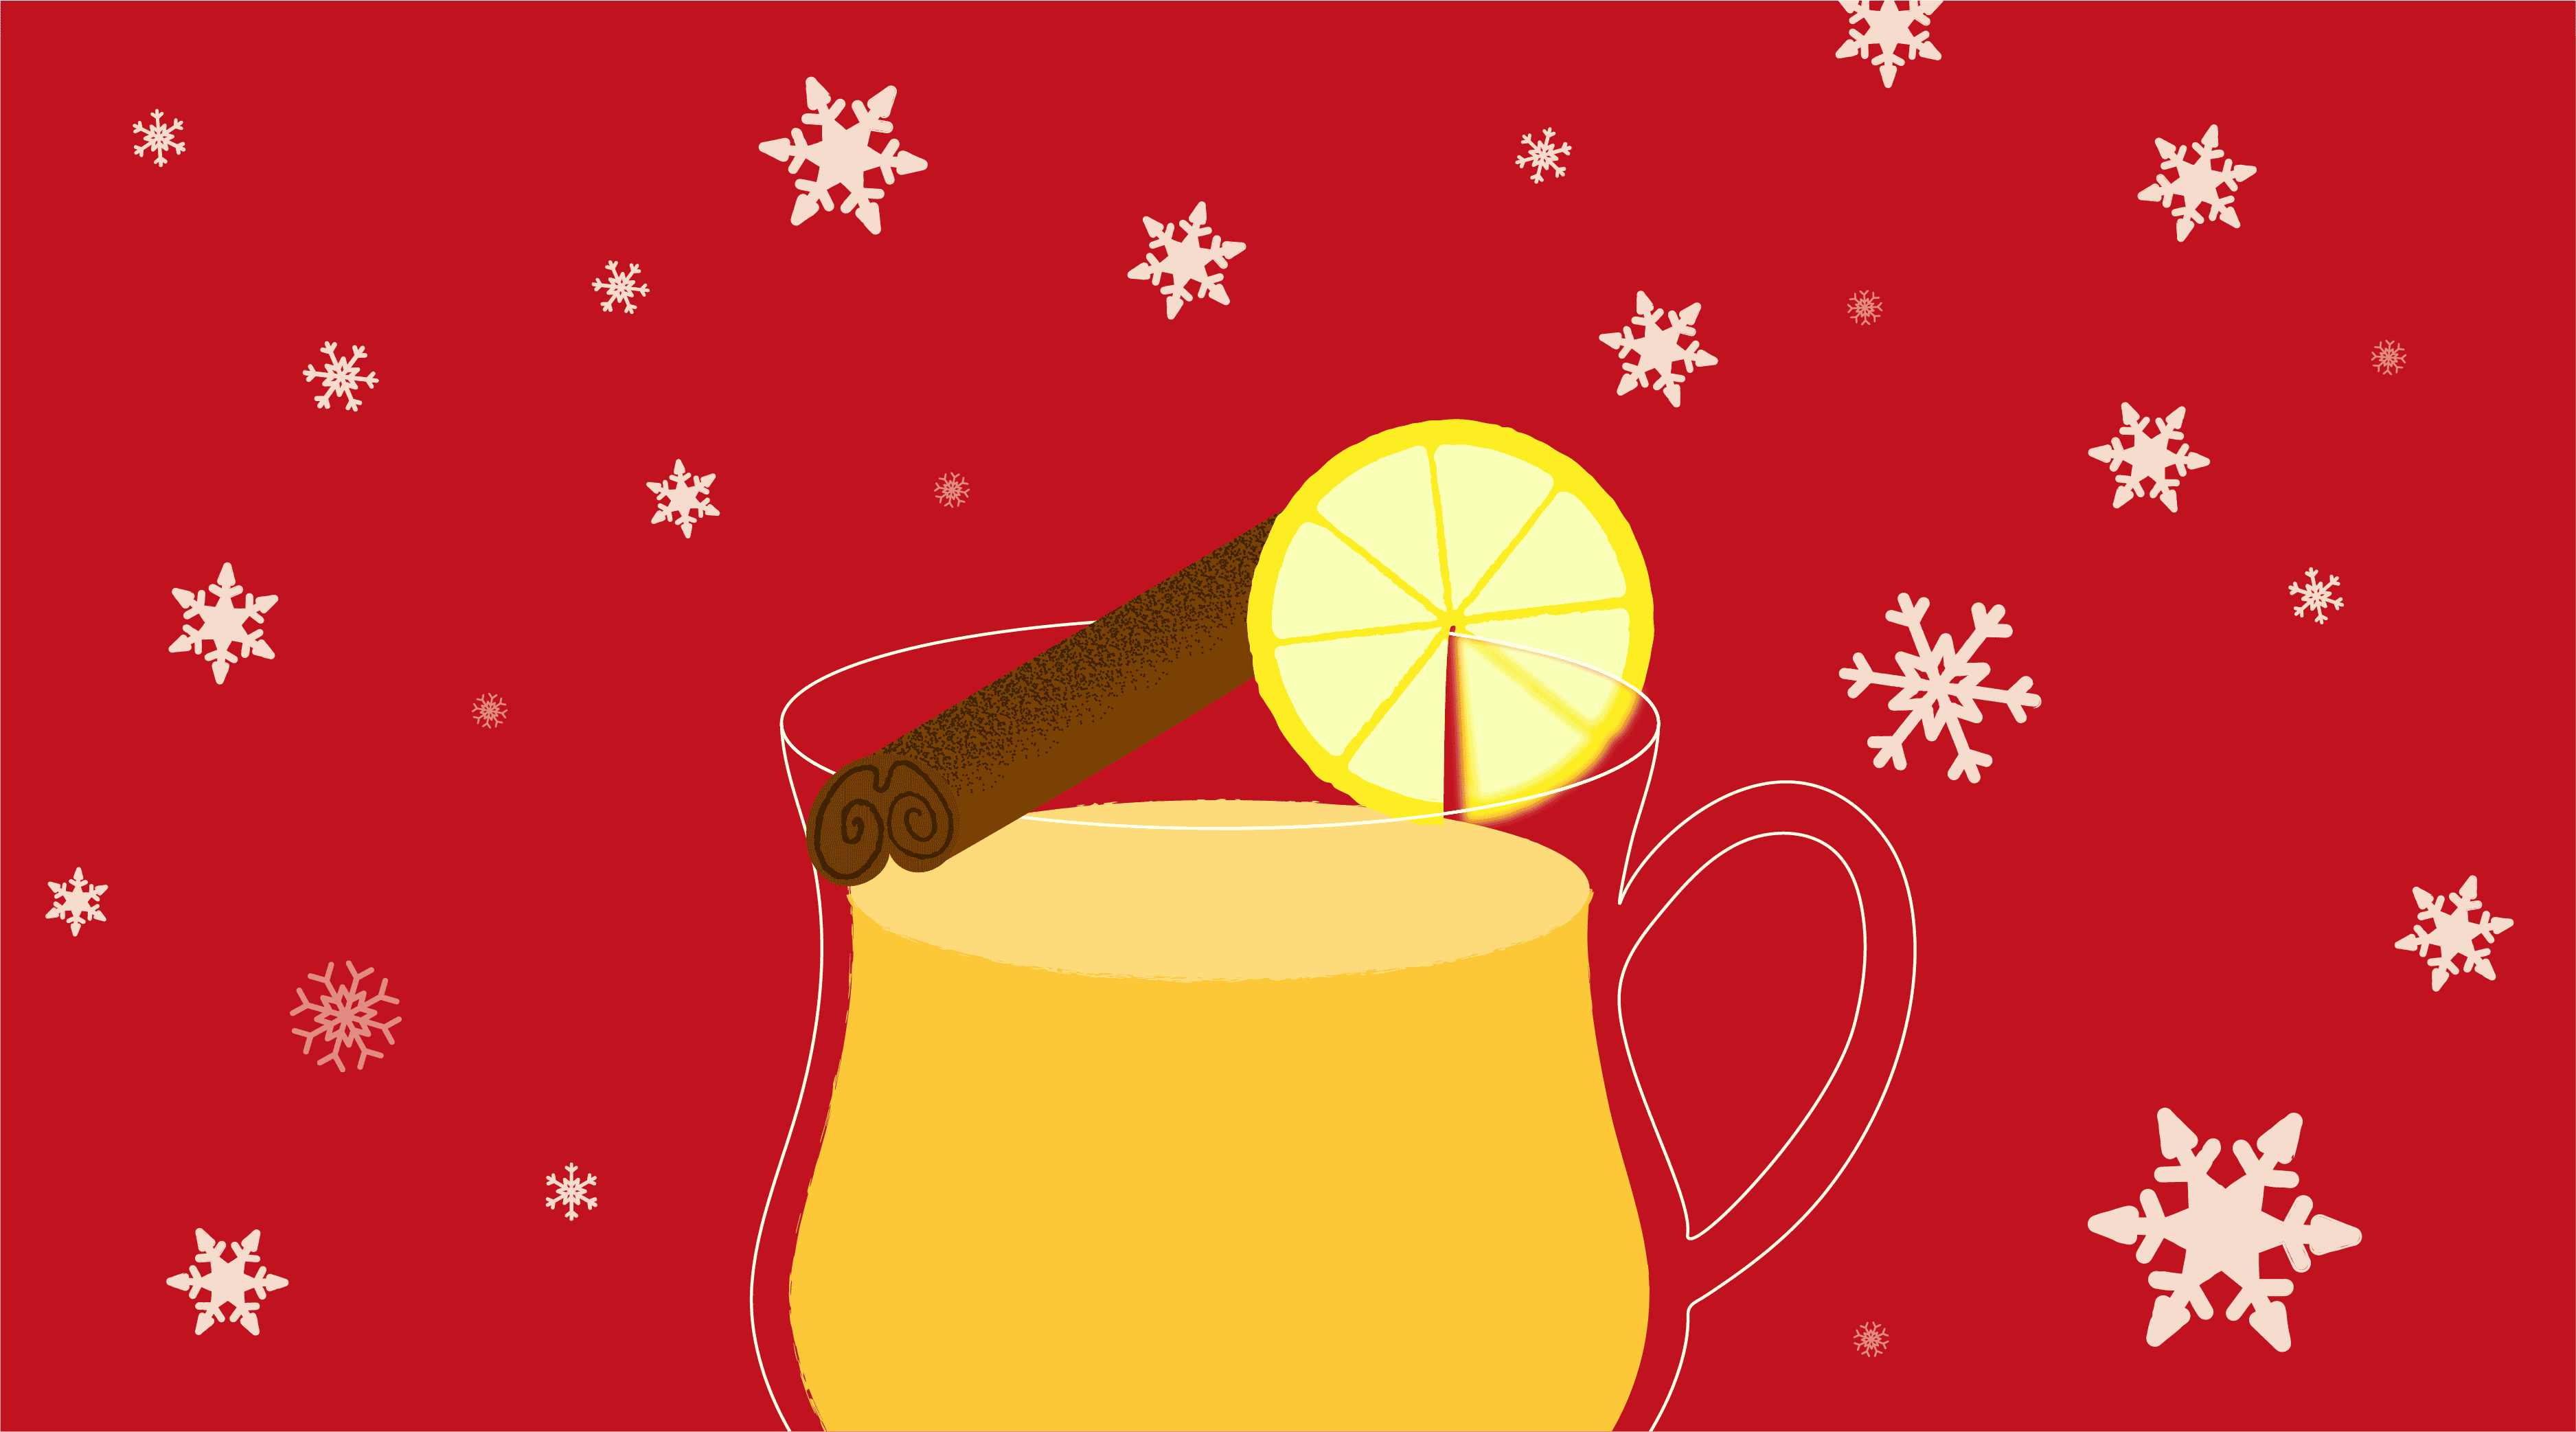 The Hot Toddy Is The New Nightcap